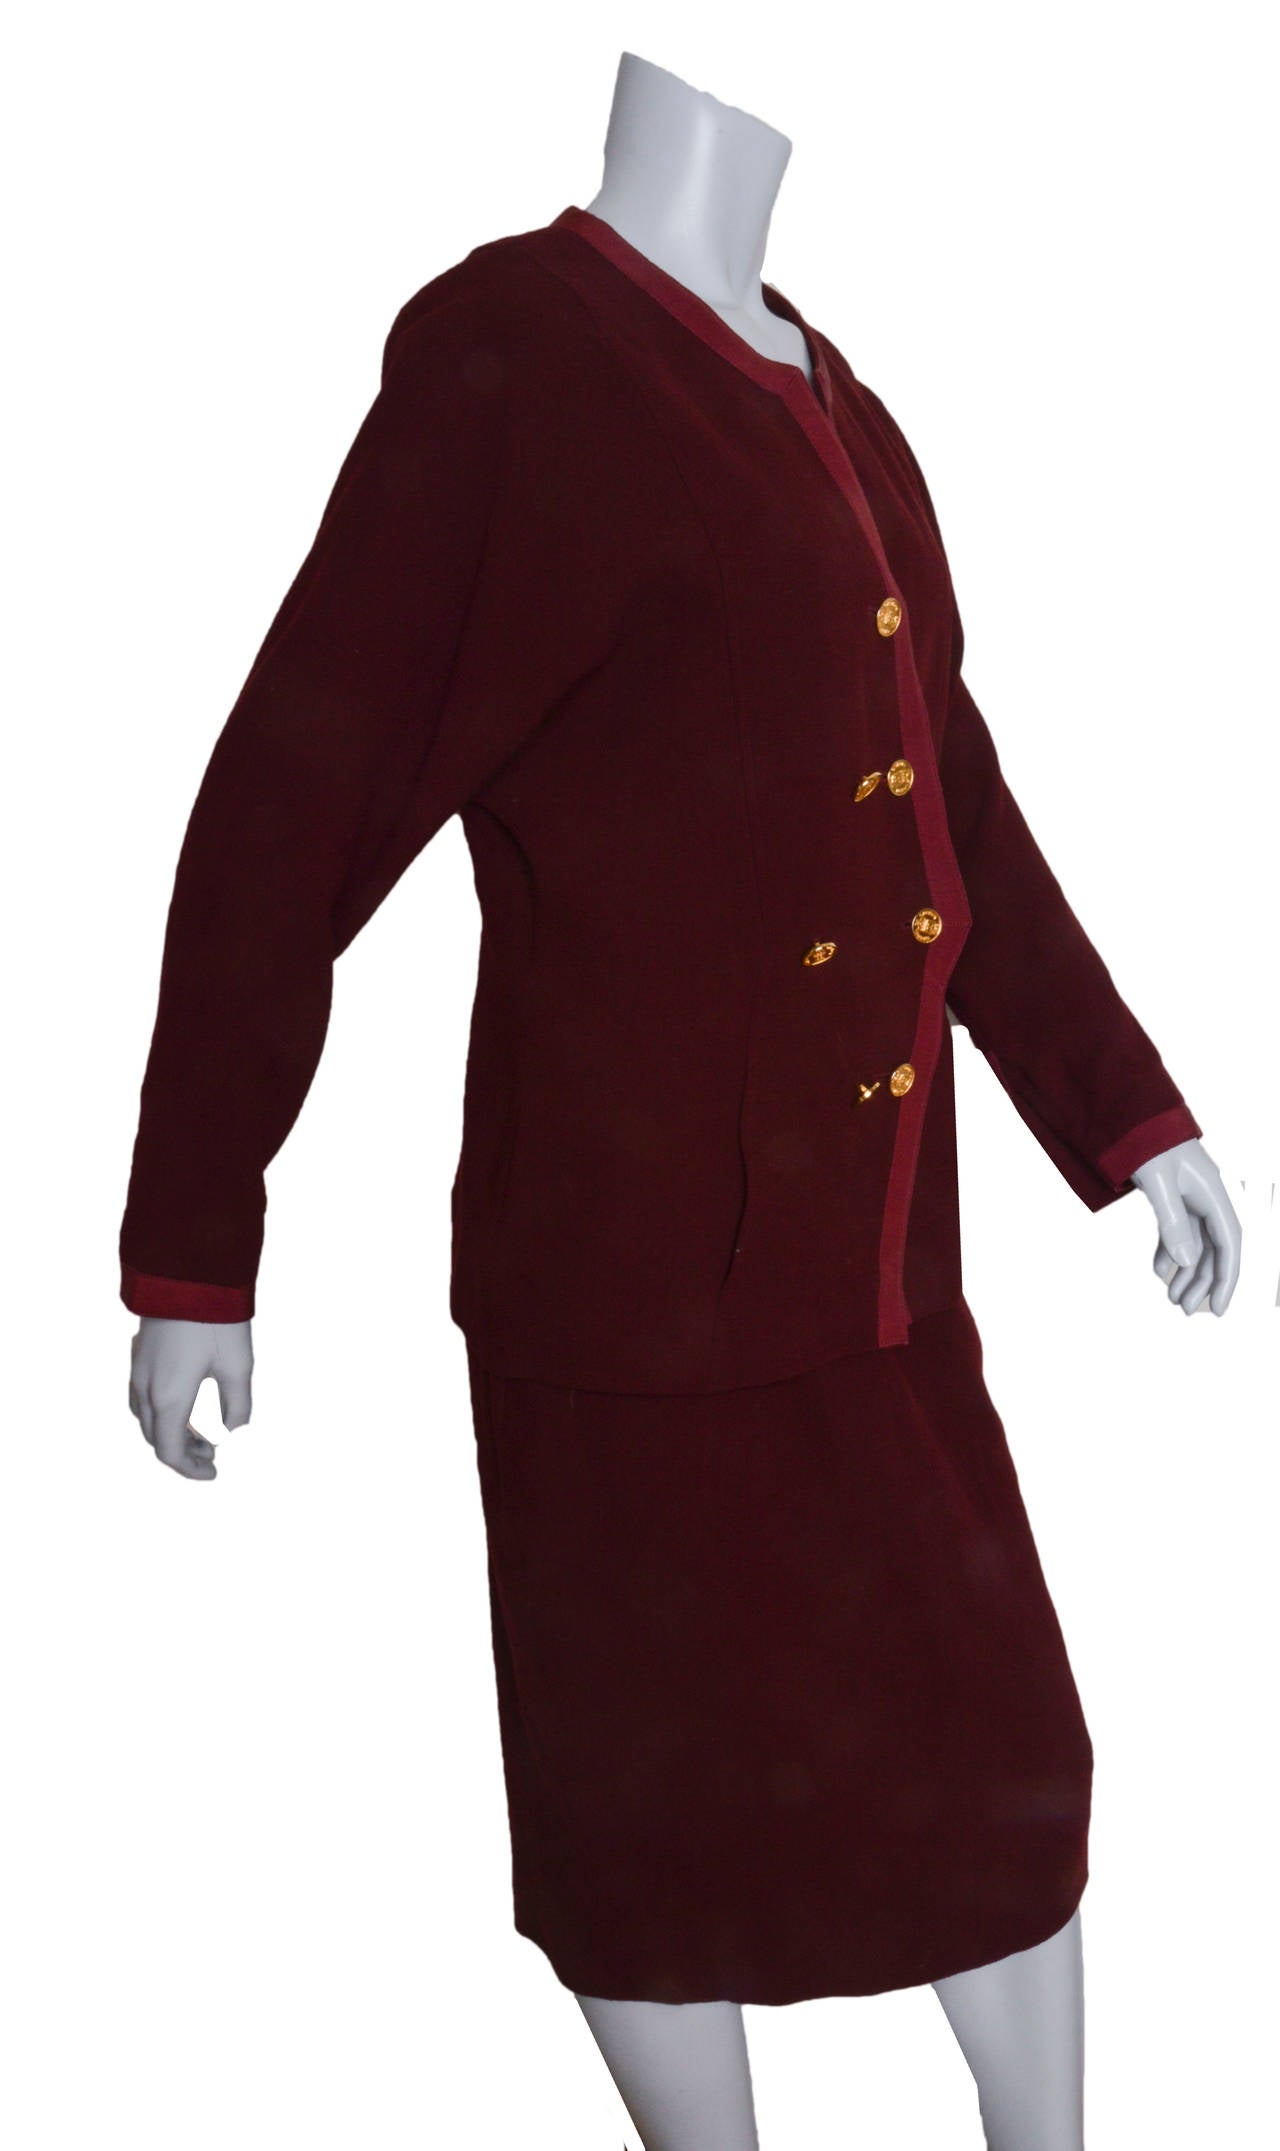 Vintage Chanel Boutique burgundy knit skirt suit.
Wool/nylon blend.
Double breasted jacket features contrasting ribbon trim.
Gold coin-like embossed Chanel buttons adorn the front in a diamond shape.
Gold buttons at cuff.
Lined.

Measurements:
Bust: